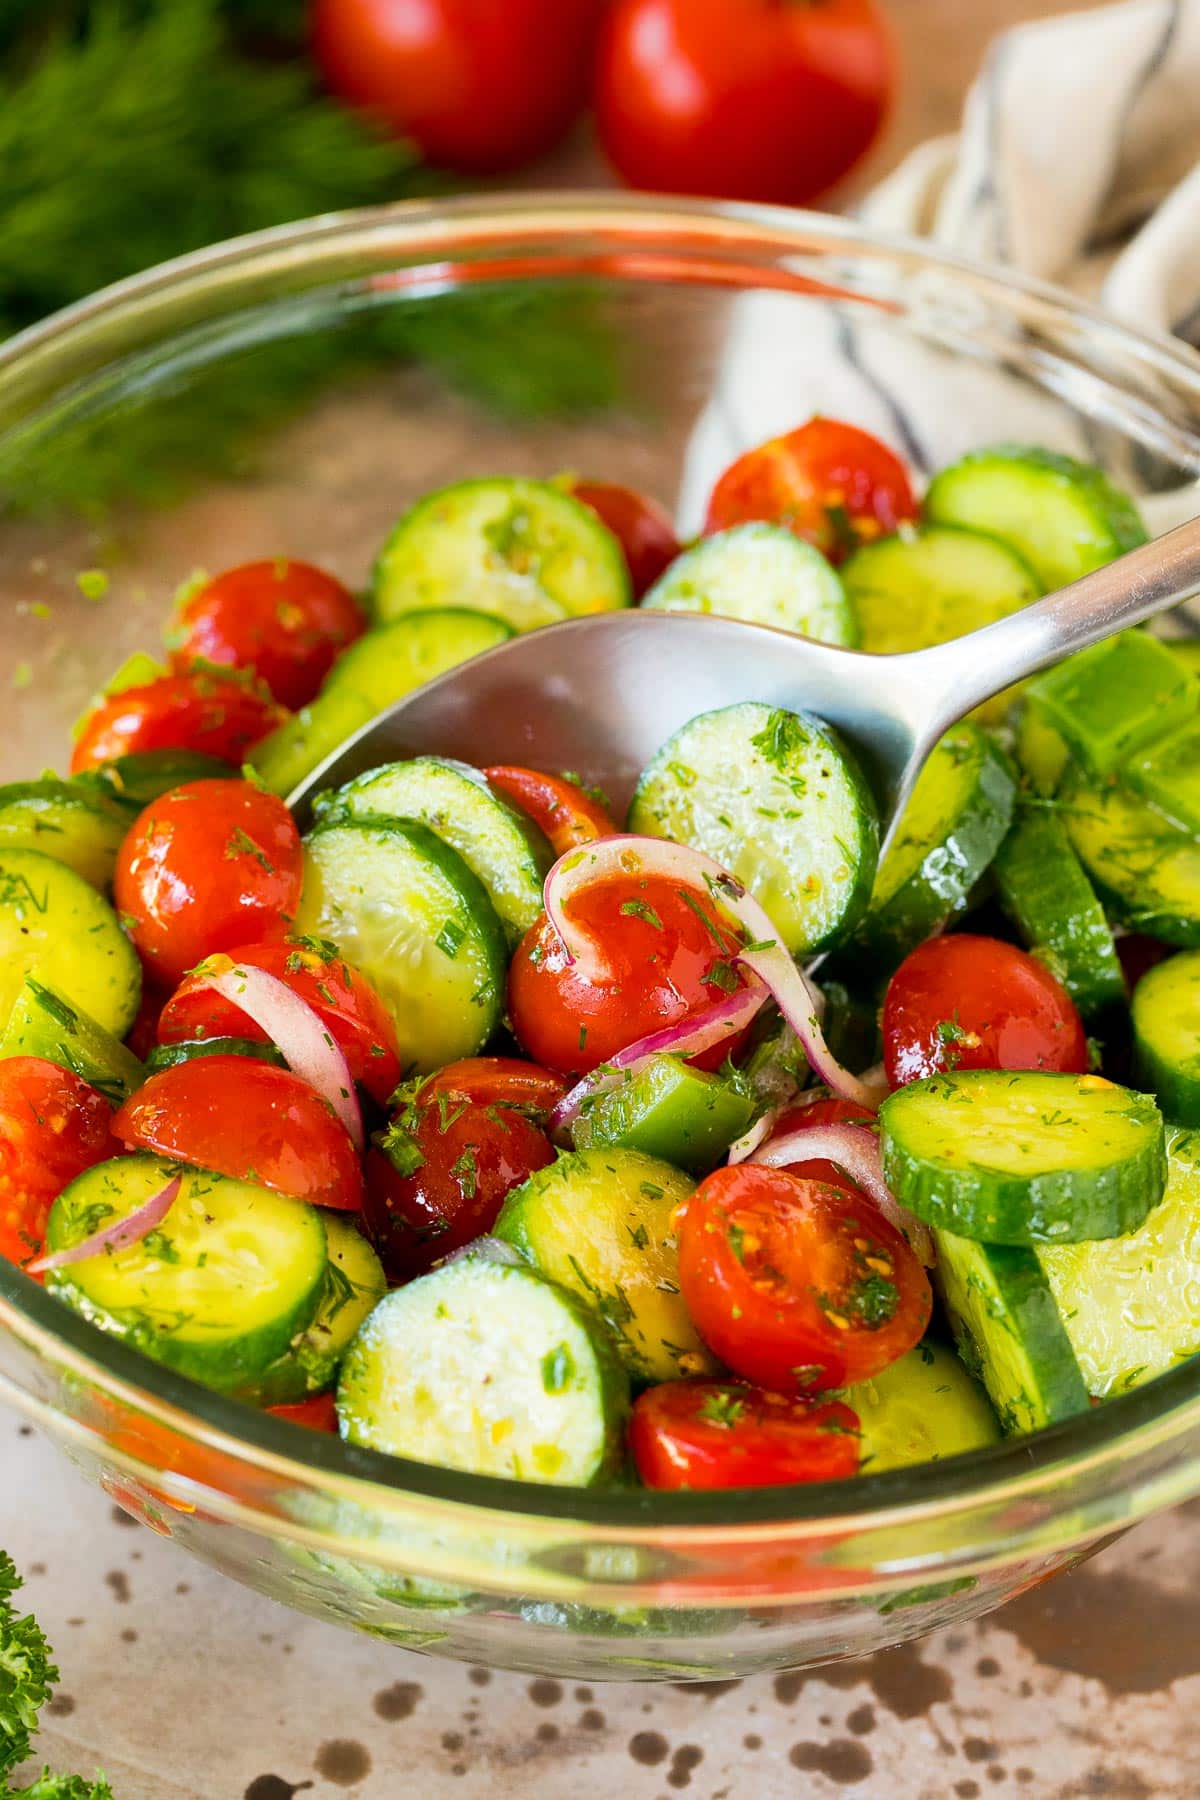 A spoon serving up a portion of cucumber and tomato salad.